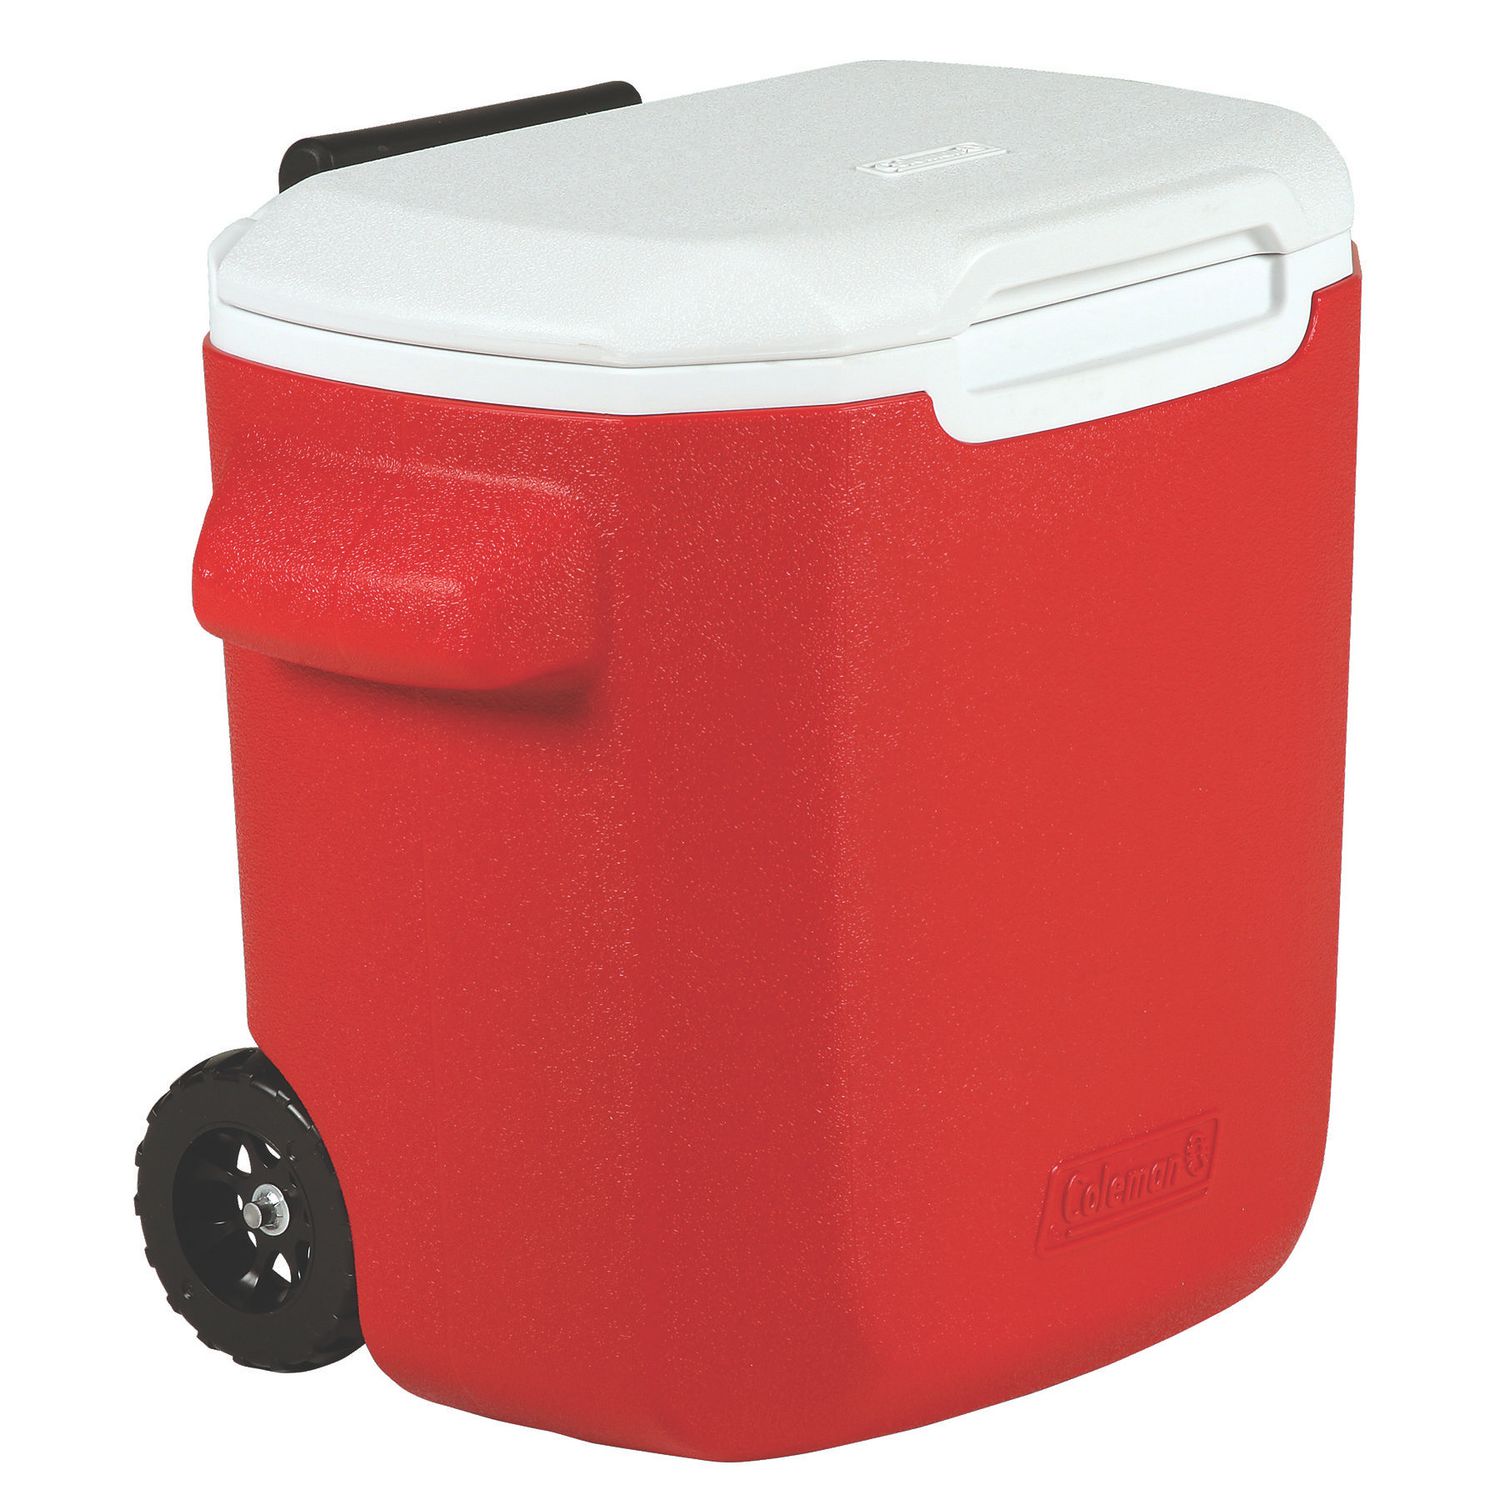 Coleman 28 qt Personal Wheeled Cooler - Red | Walmart Canada